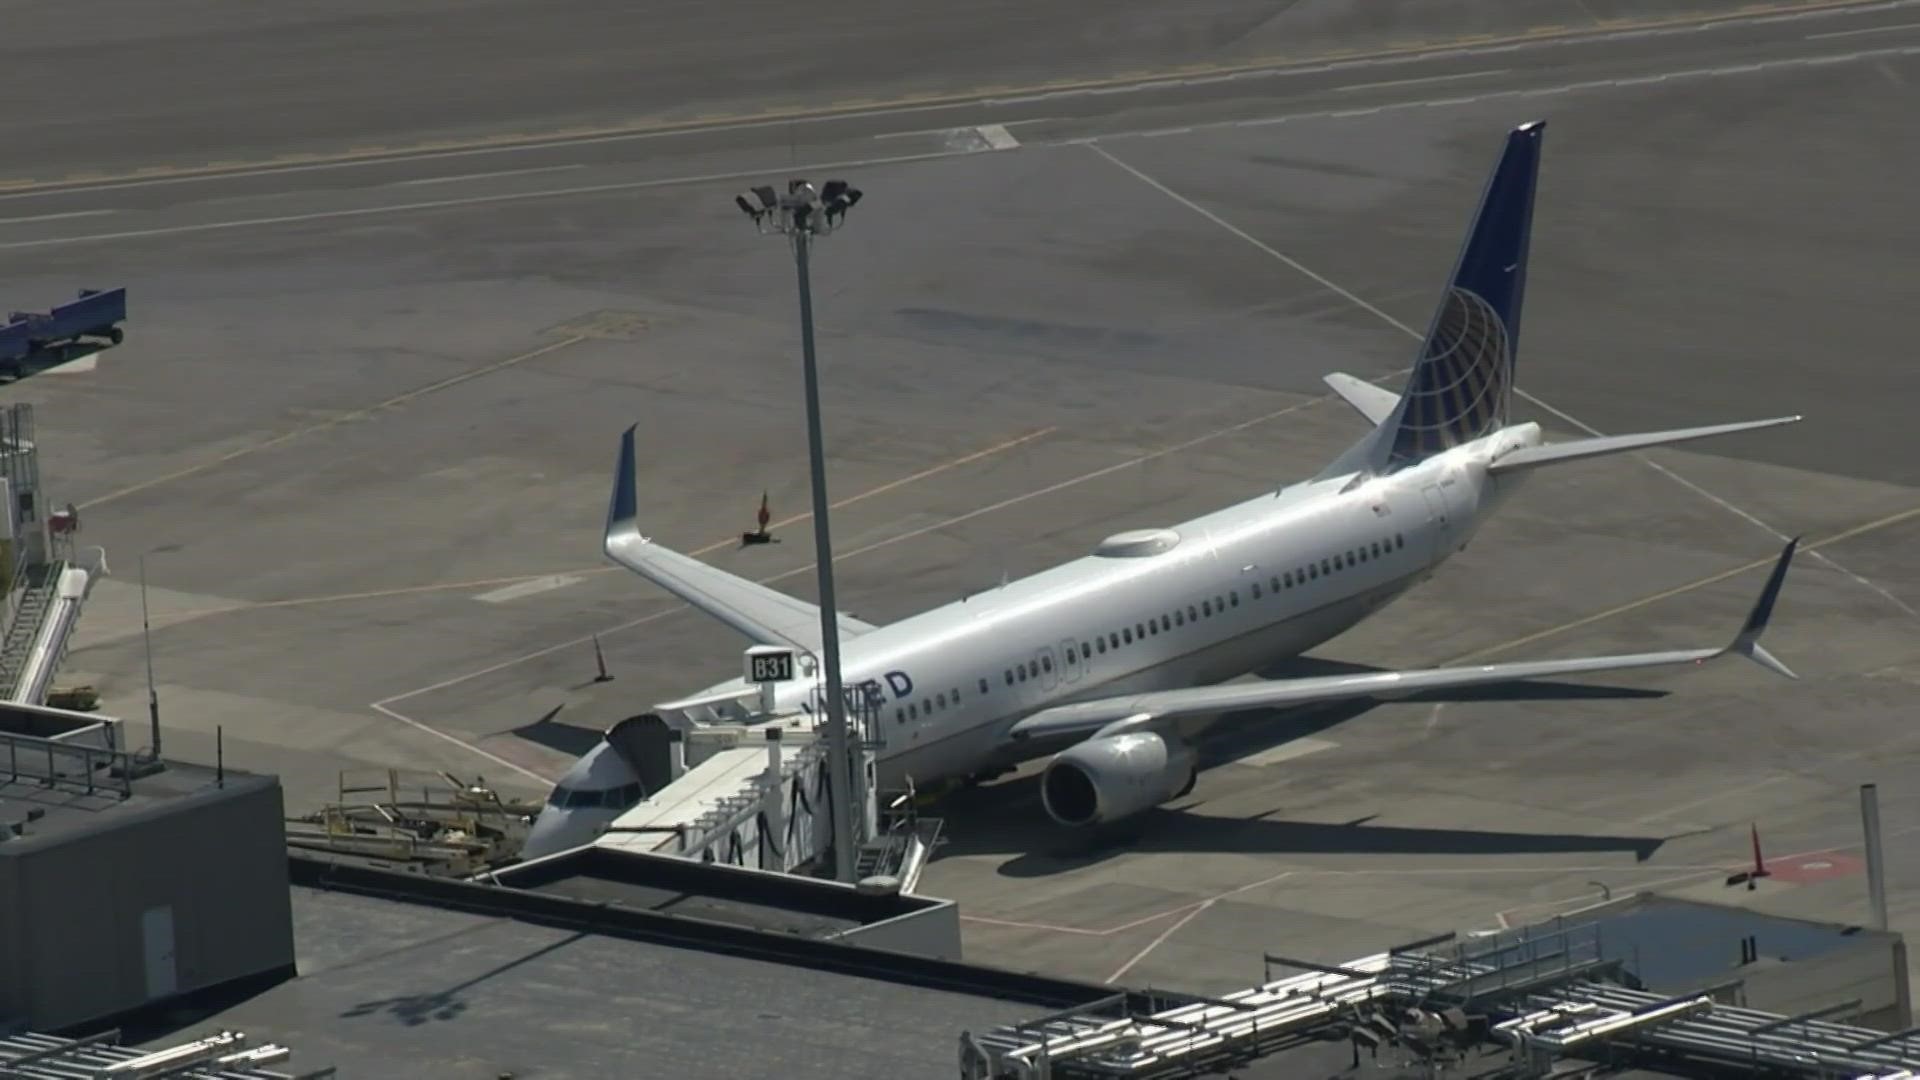 No one was hurt when the two United flights touched Monday near the gate area at Boston Logan International Airport.